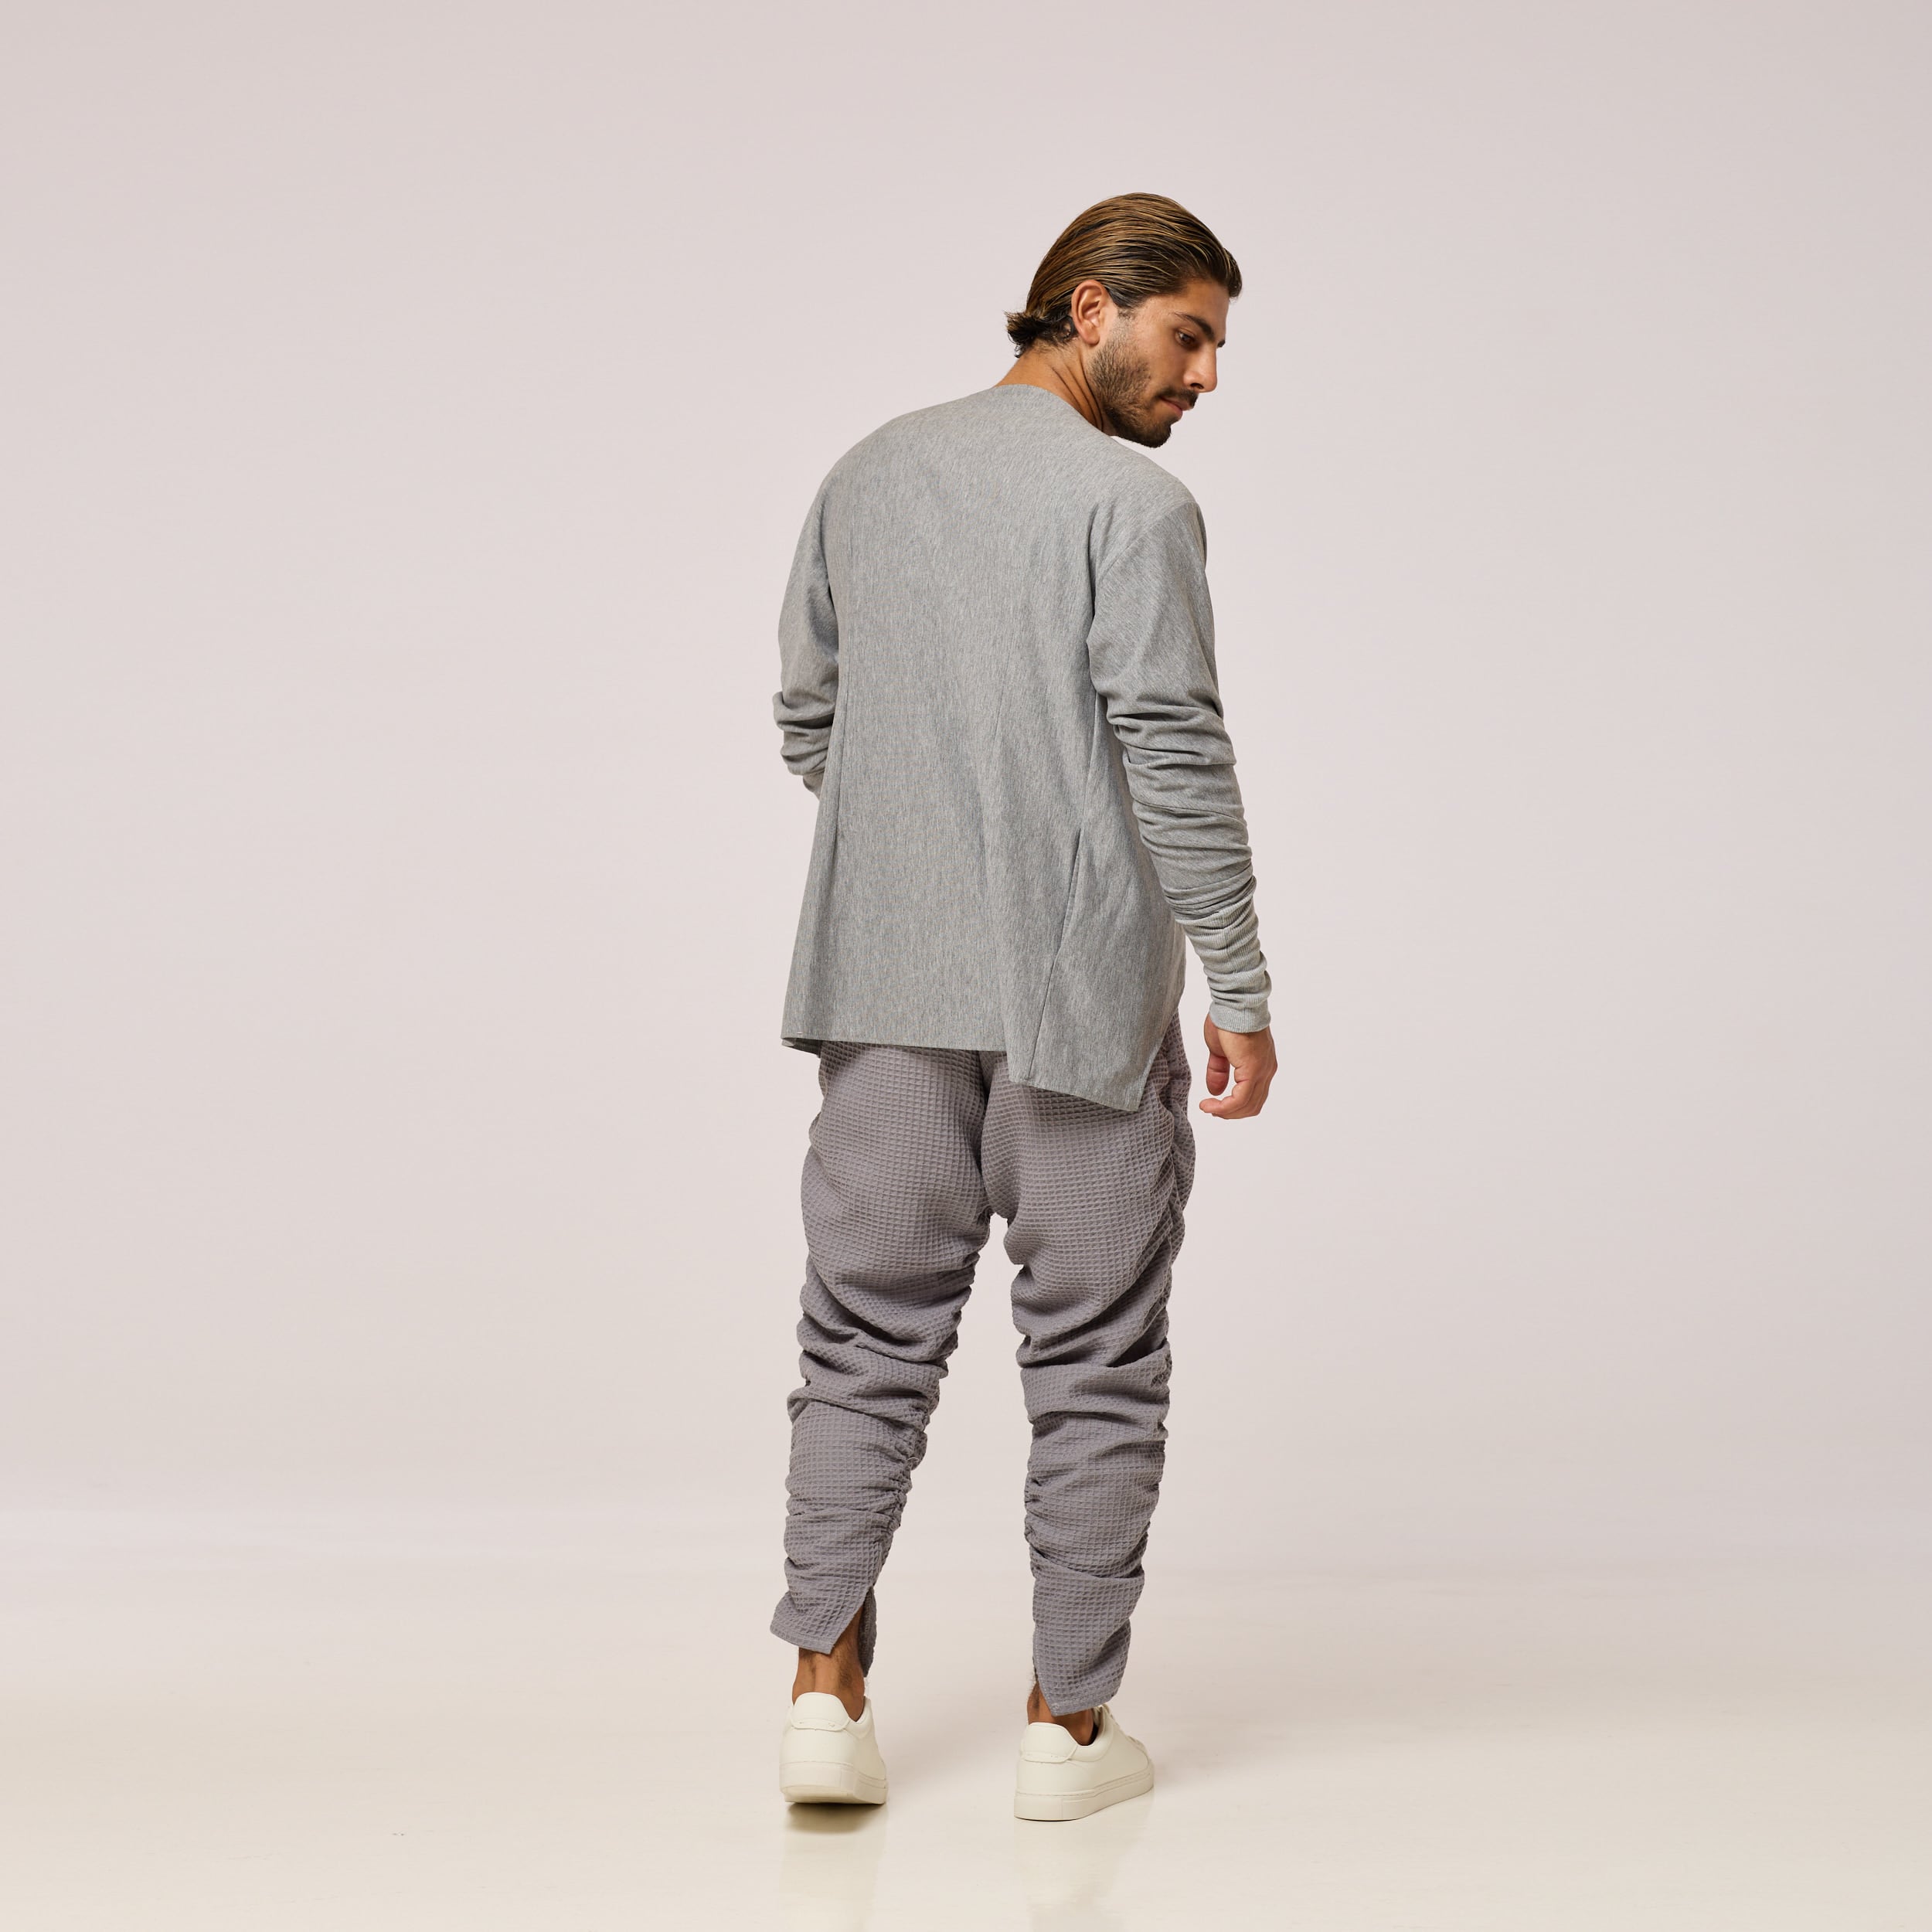 ZERØ London - Back view, full length view mens zero waste grey jacket, designed & made in London